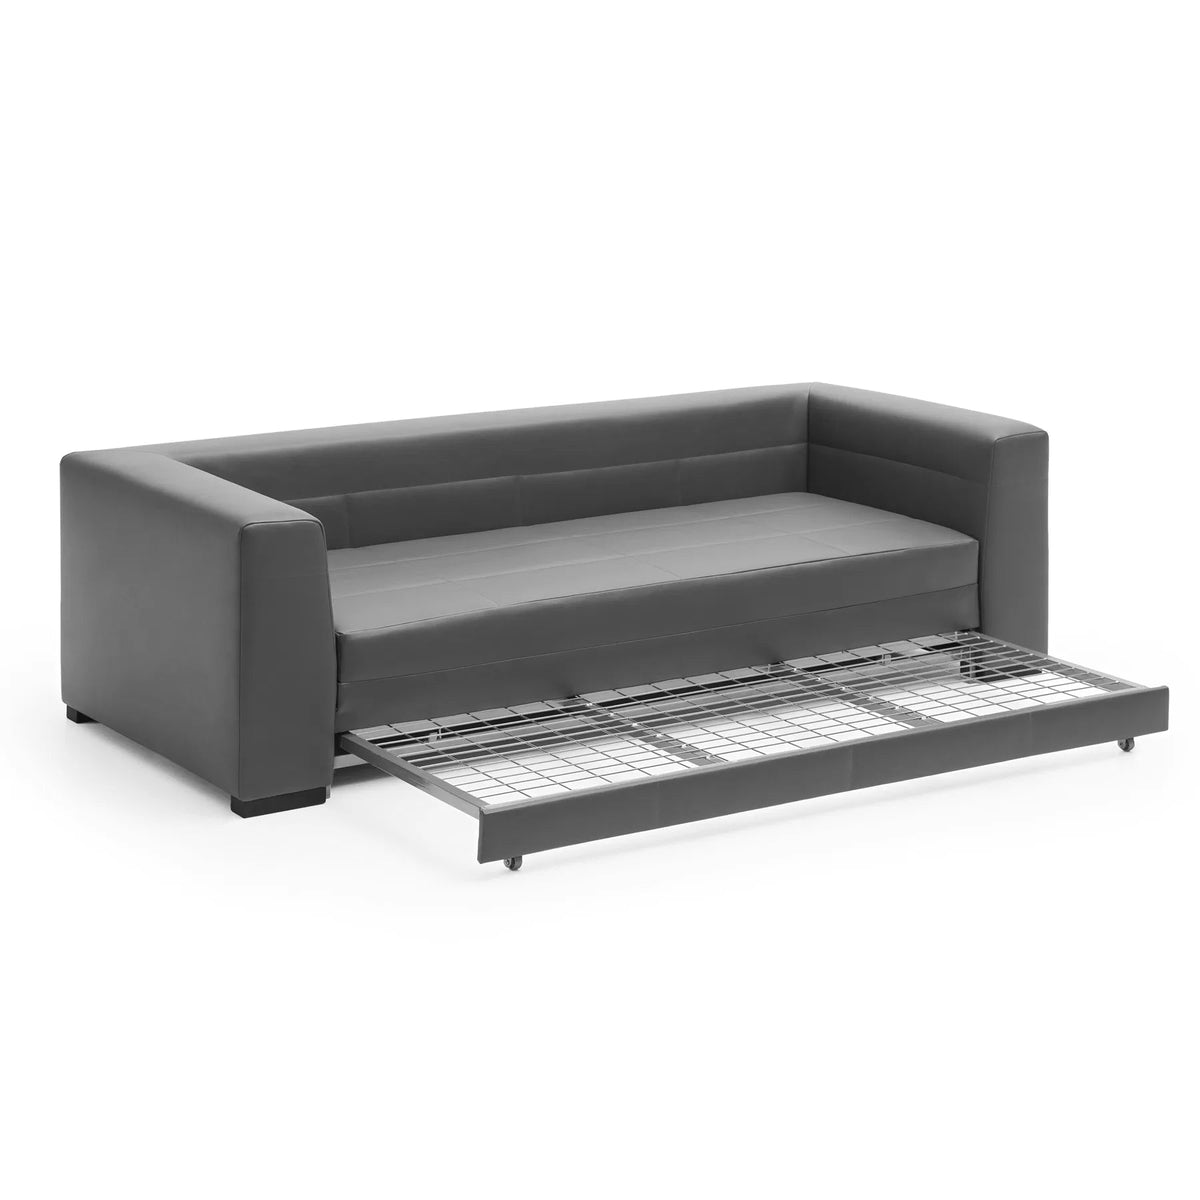 Anta 940 Sofa Bed-TM Leader-Contract Furniture Store